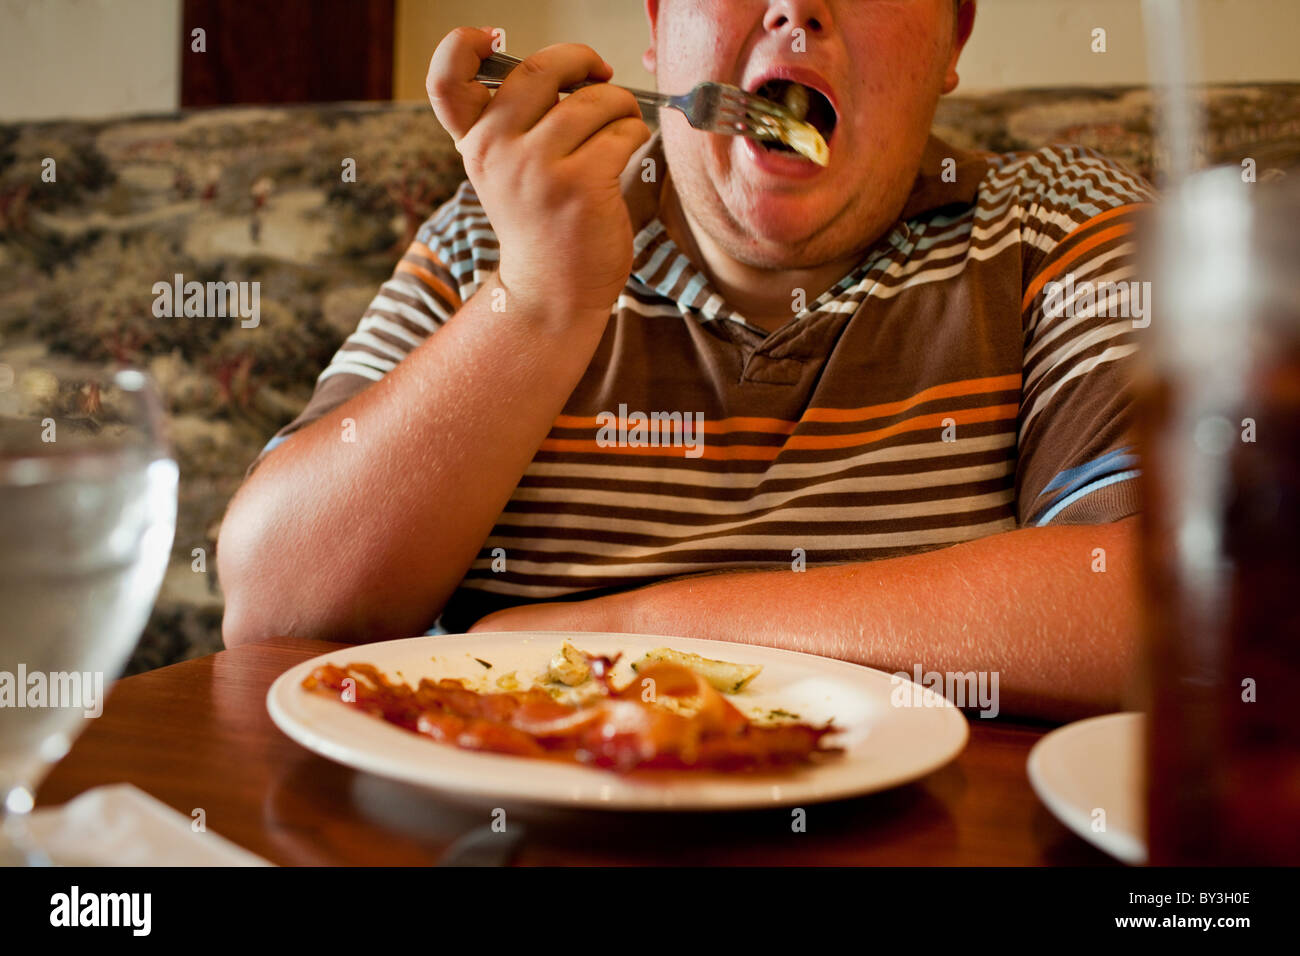 La Grange, California, United States.  A teenager takes a bite of pasta for lunch, with a side of bacon. Stock Photo